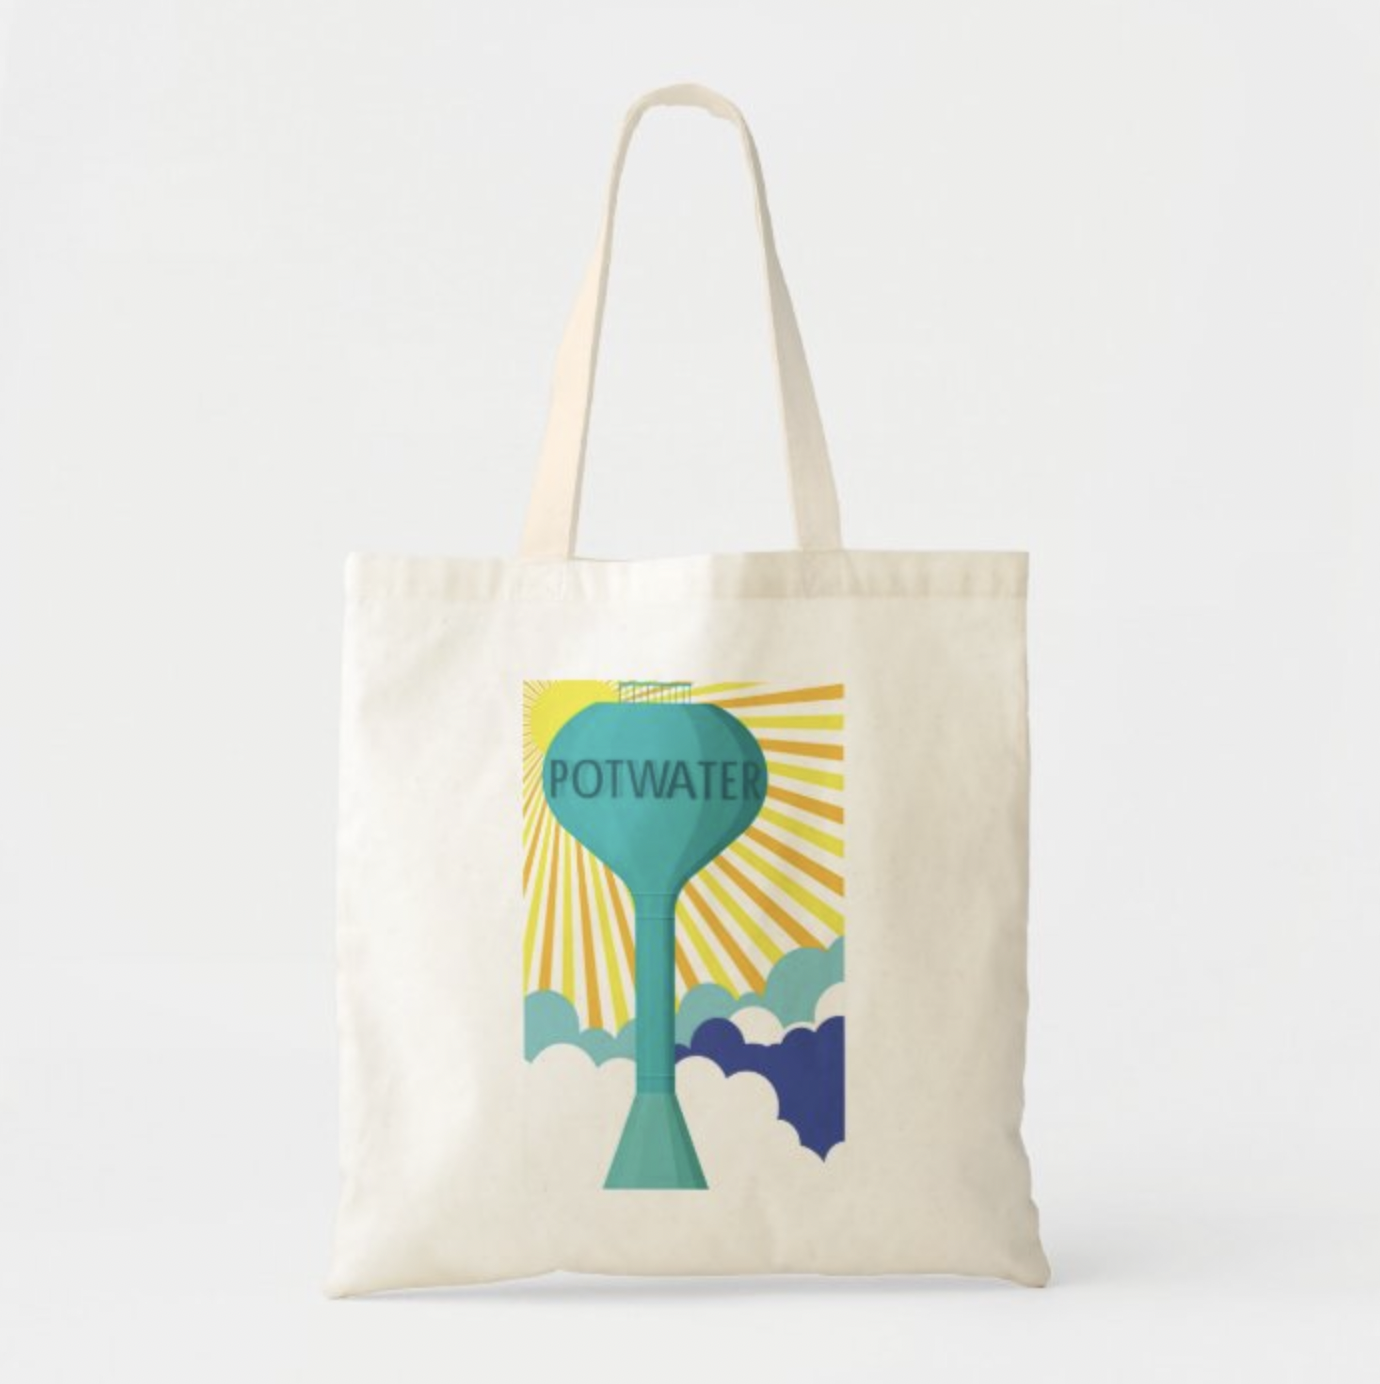 PotWater Tower Tote Bag